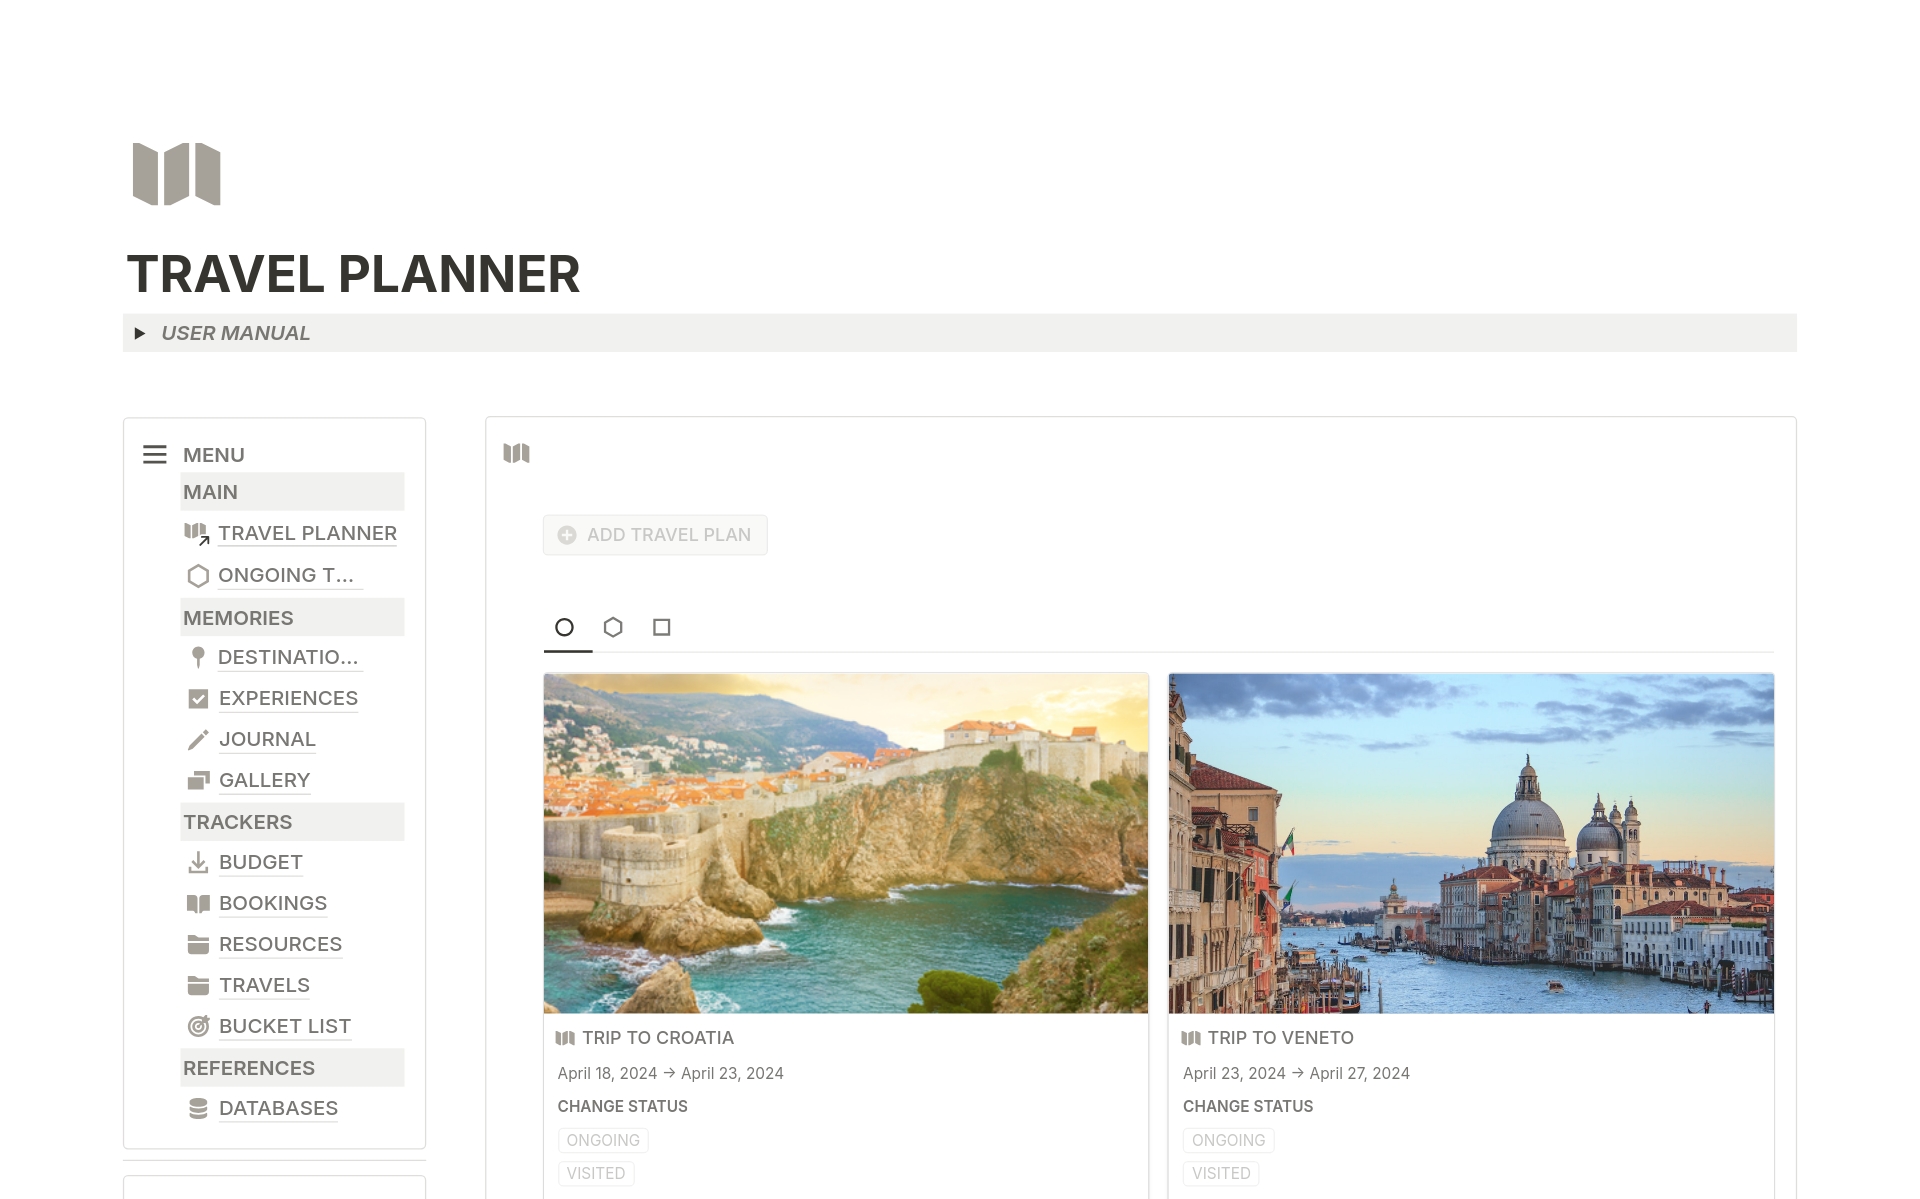 This travel planner helps you organize every aspect of your trips in one convenient place. Easily manage accommodations, itineraries, and transportation, track your budgets, and keep all your bookings and travel memories neatly organized.